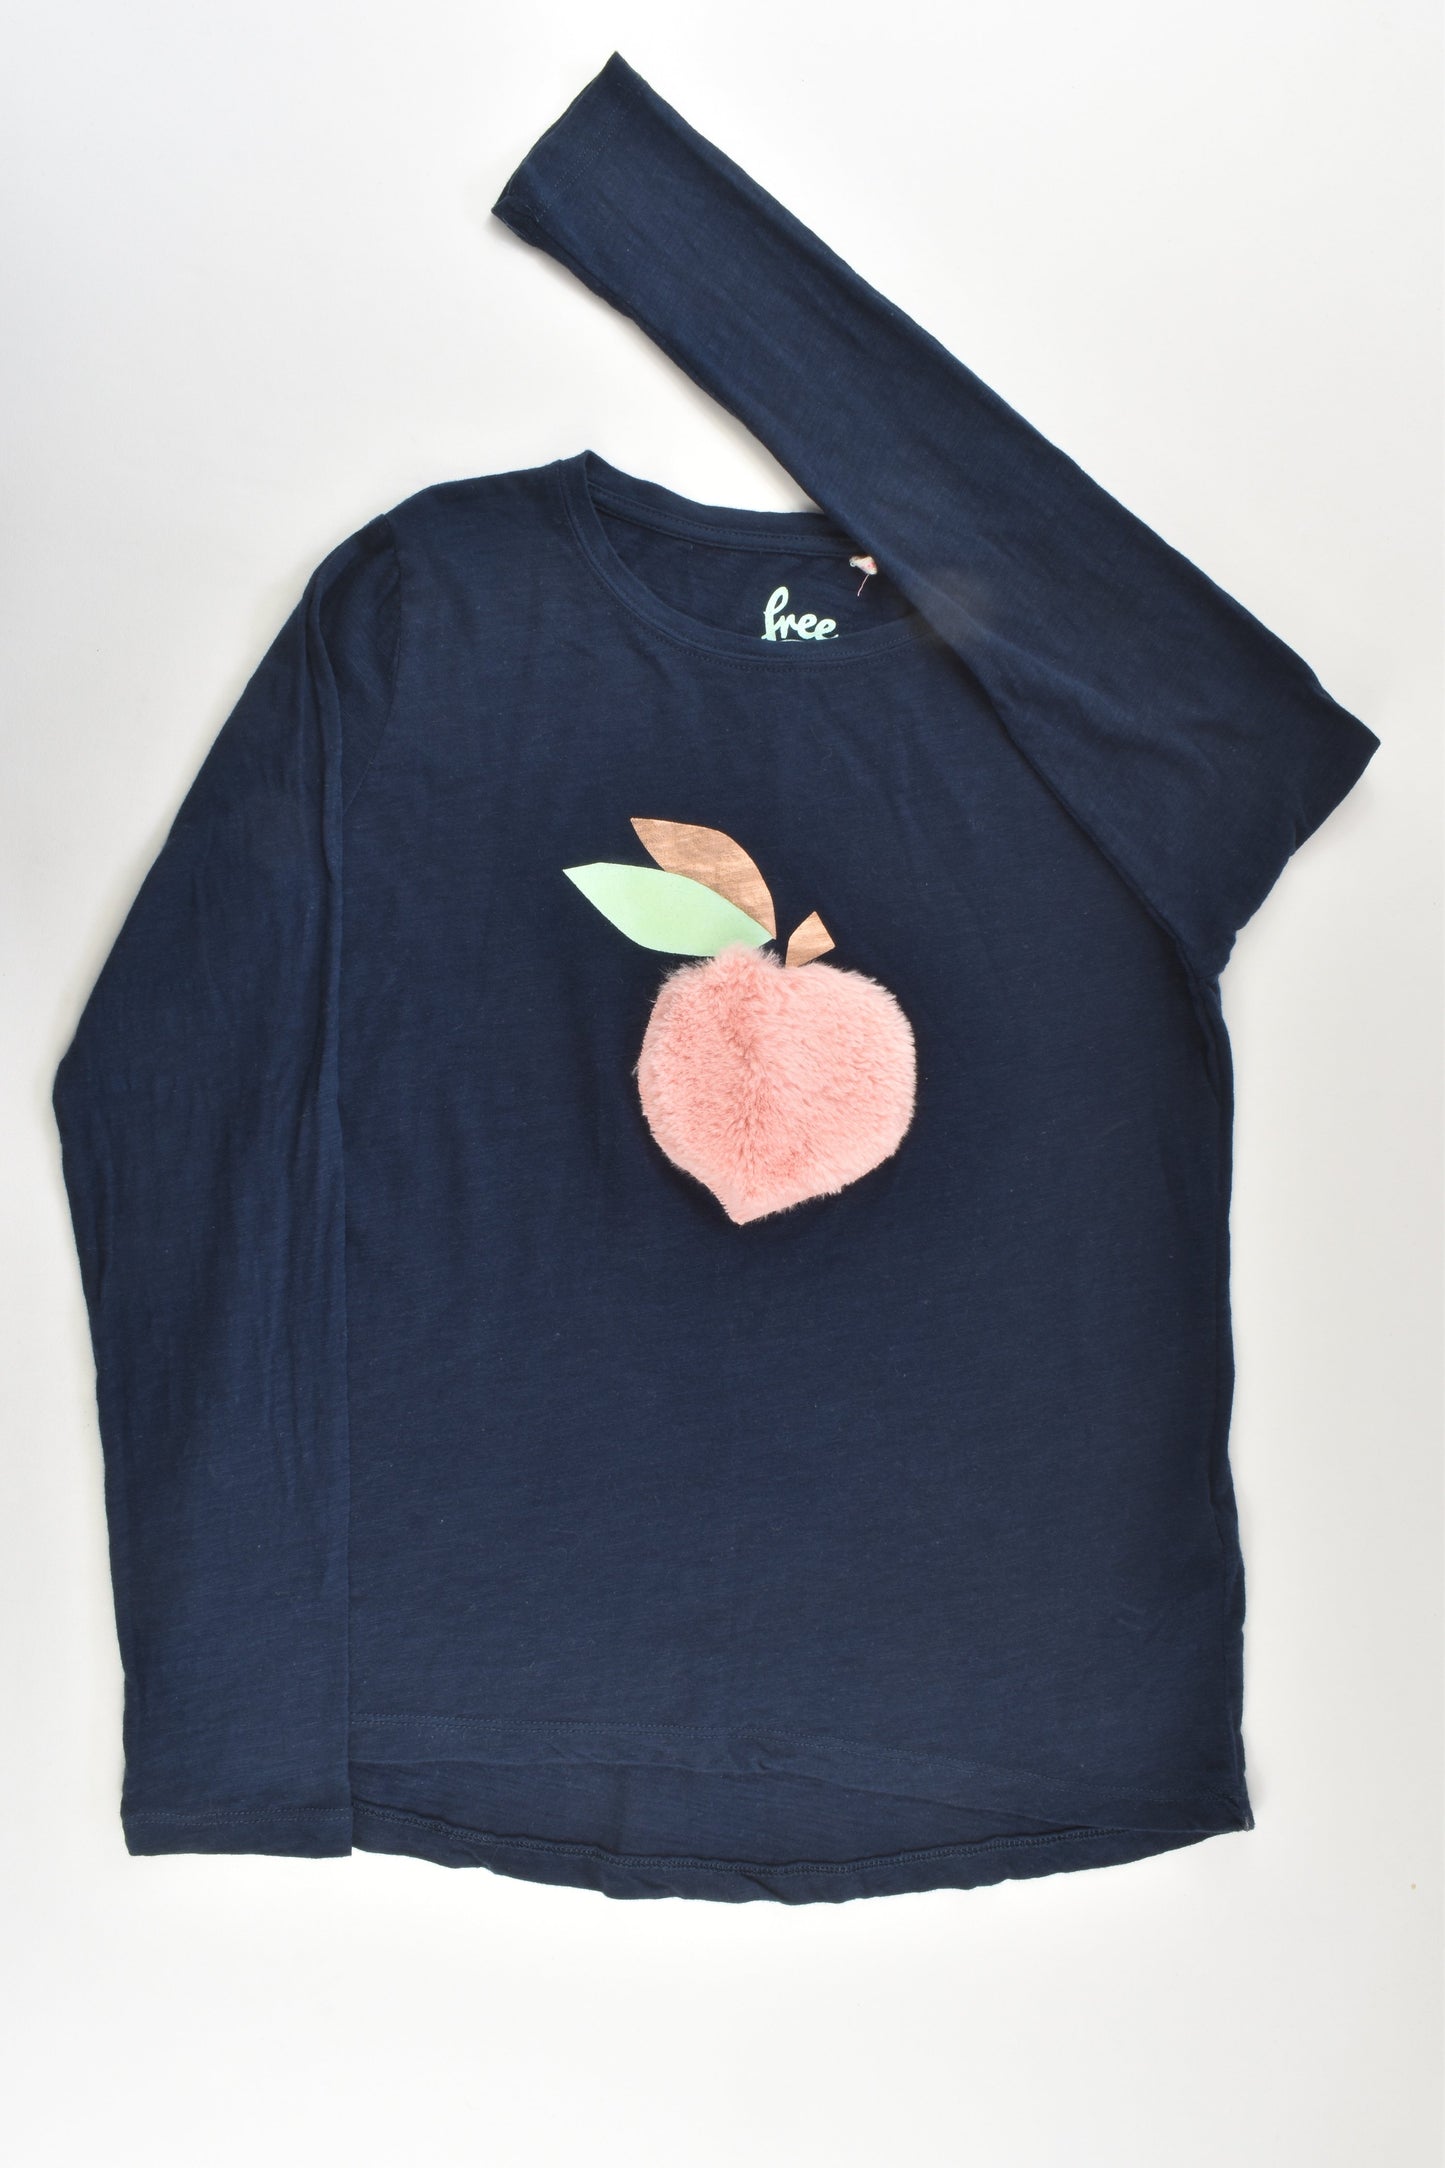 Free by Cotton On Size 11 Fluffy Apple Top